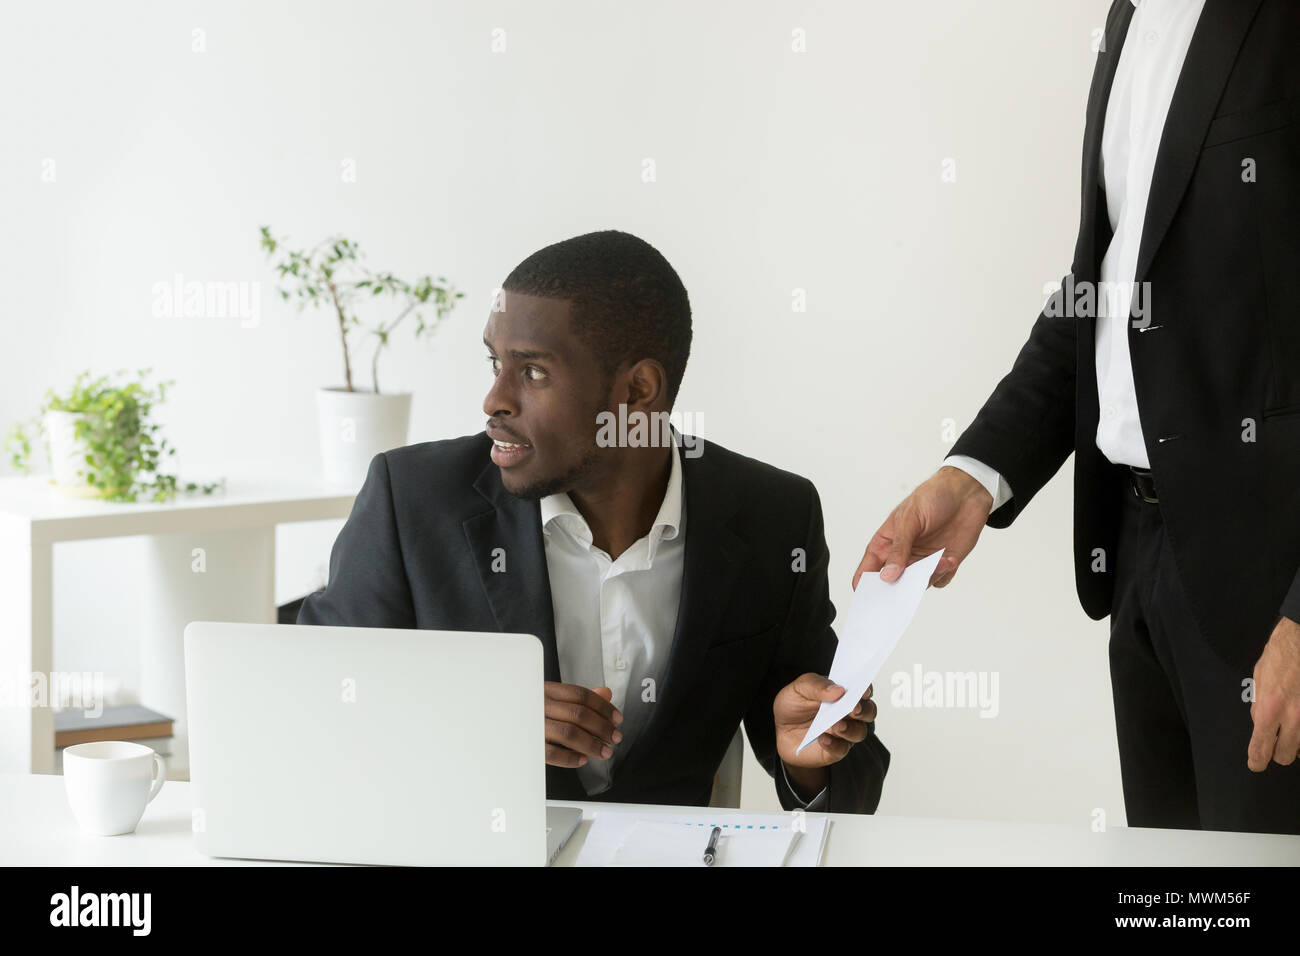 Worker giving bribe to office colleague Stock Photo